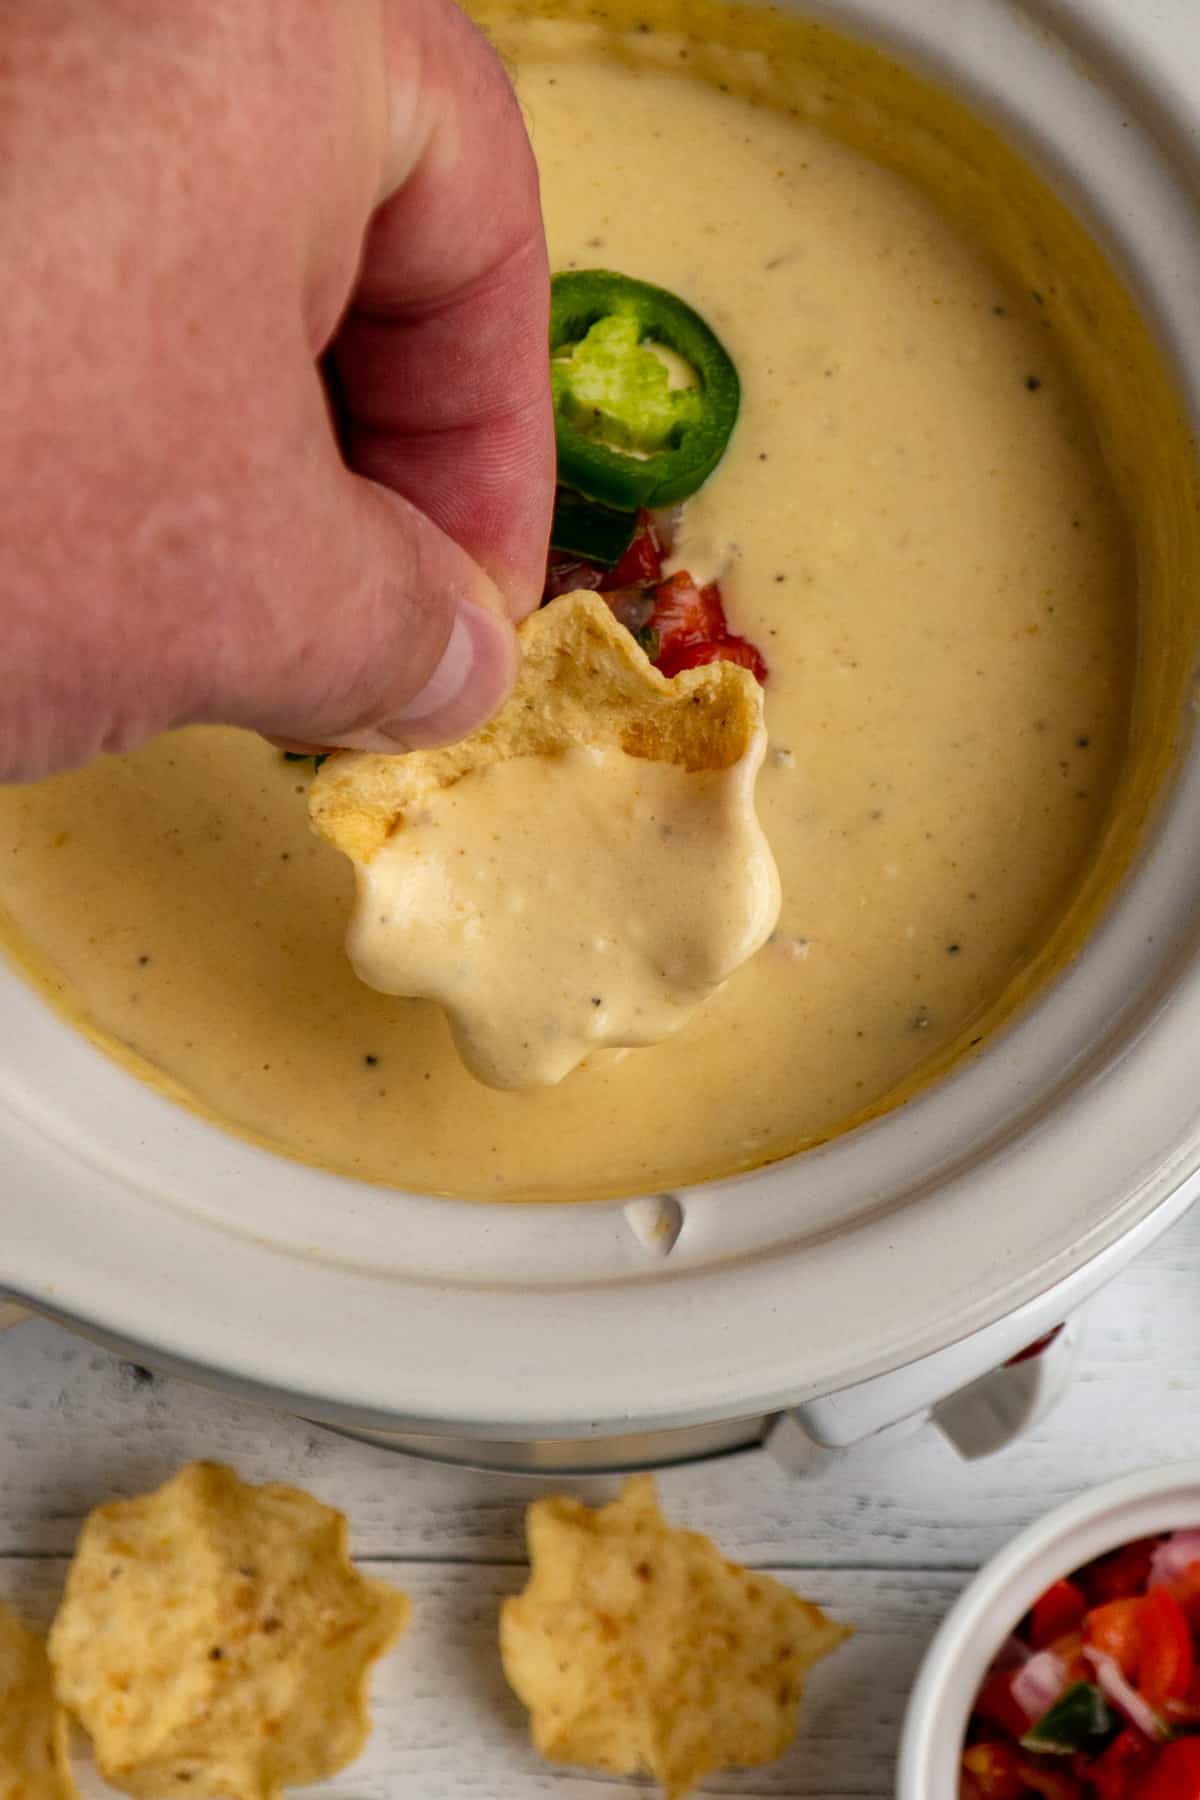 Close up of Crock-Pot white Queso dip on a chip that a hand is holding.